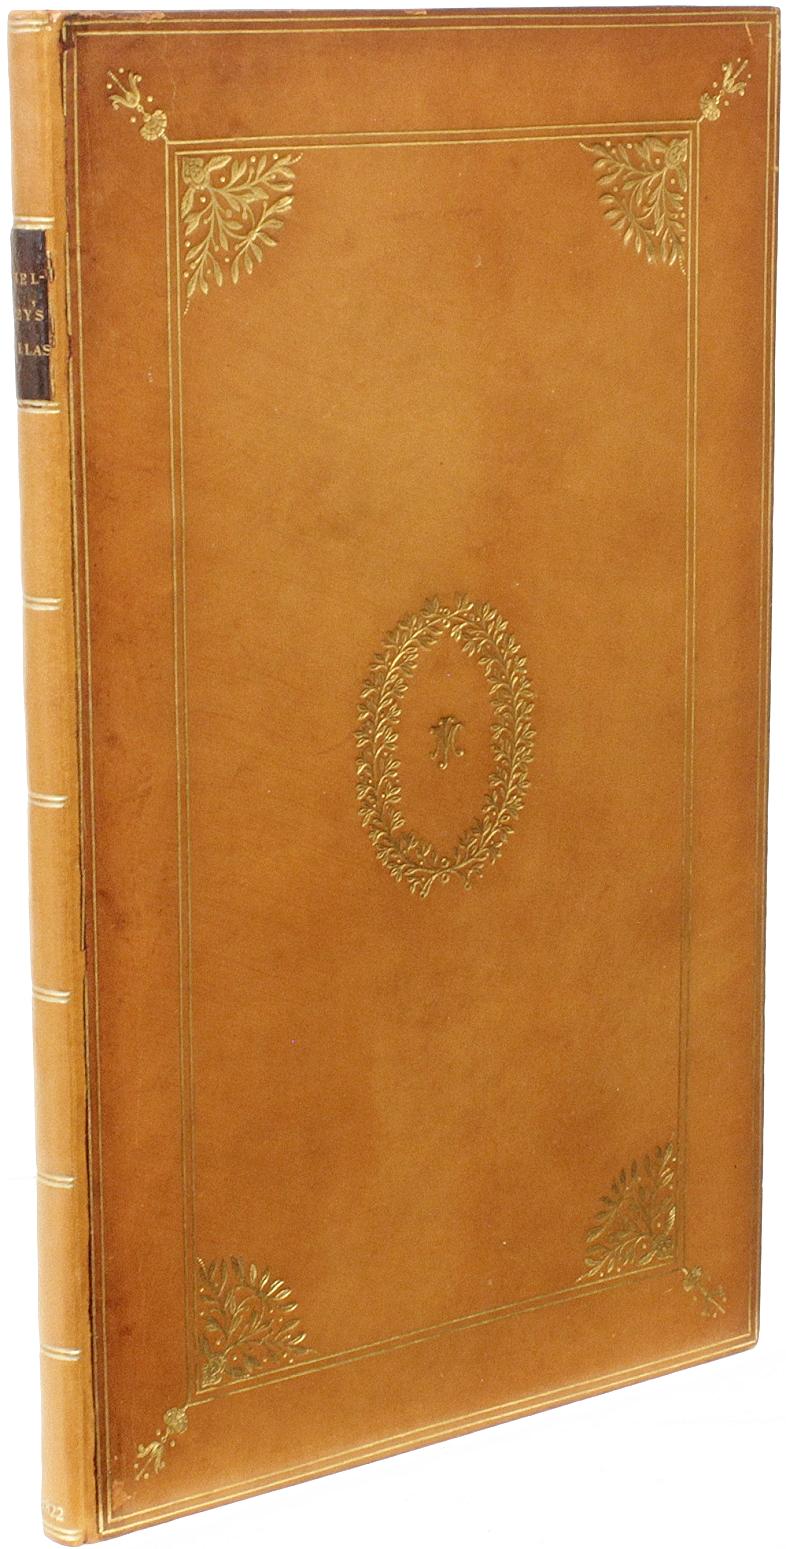 Leather Percy Bysshe Shelley, Hellas, a Lyrical Drama, First Edition 1822 the Huth Copy For Sale